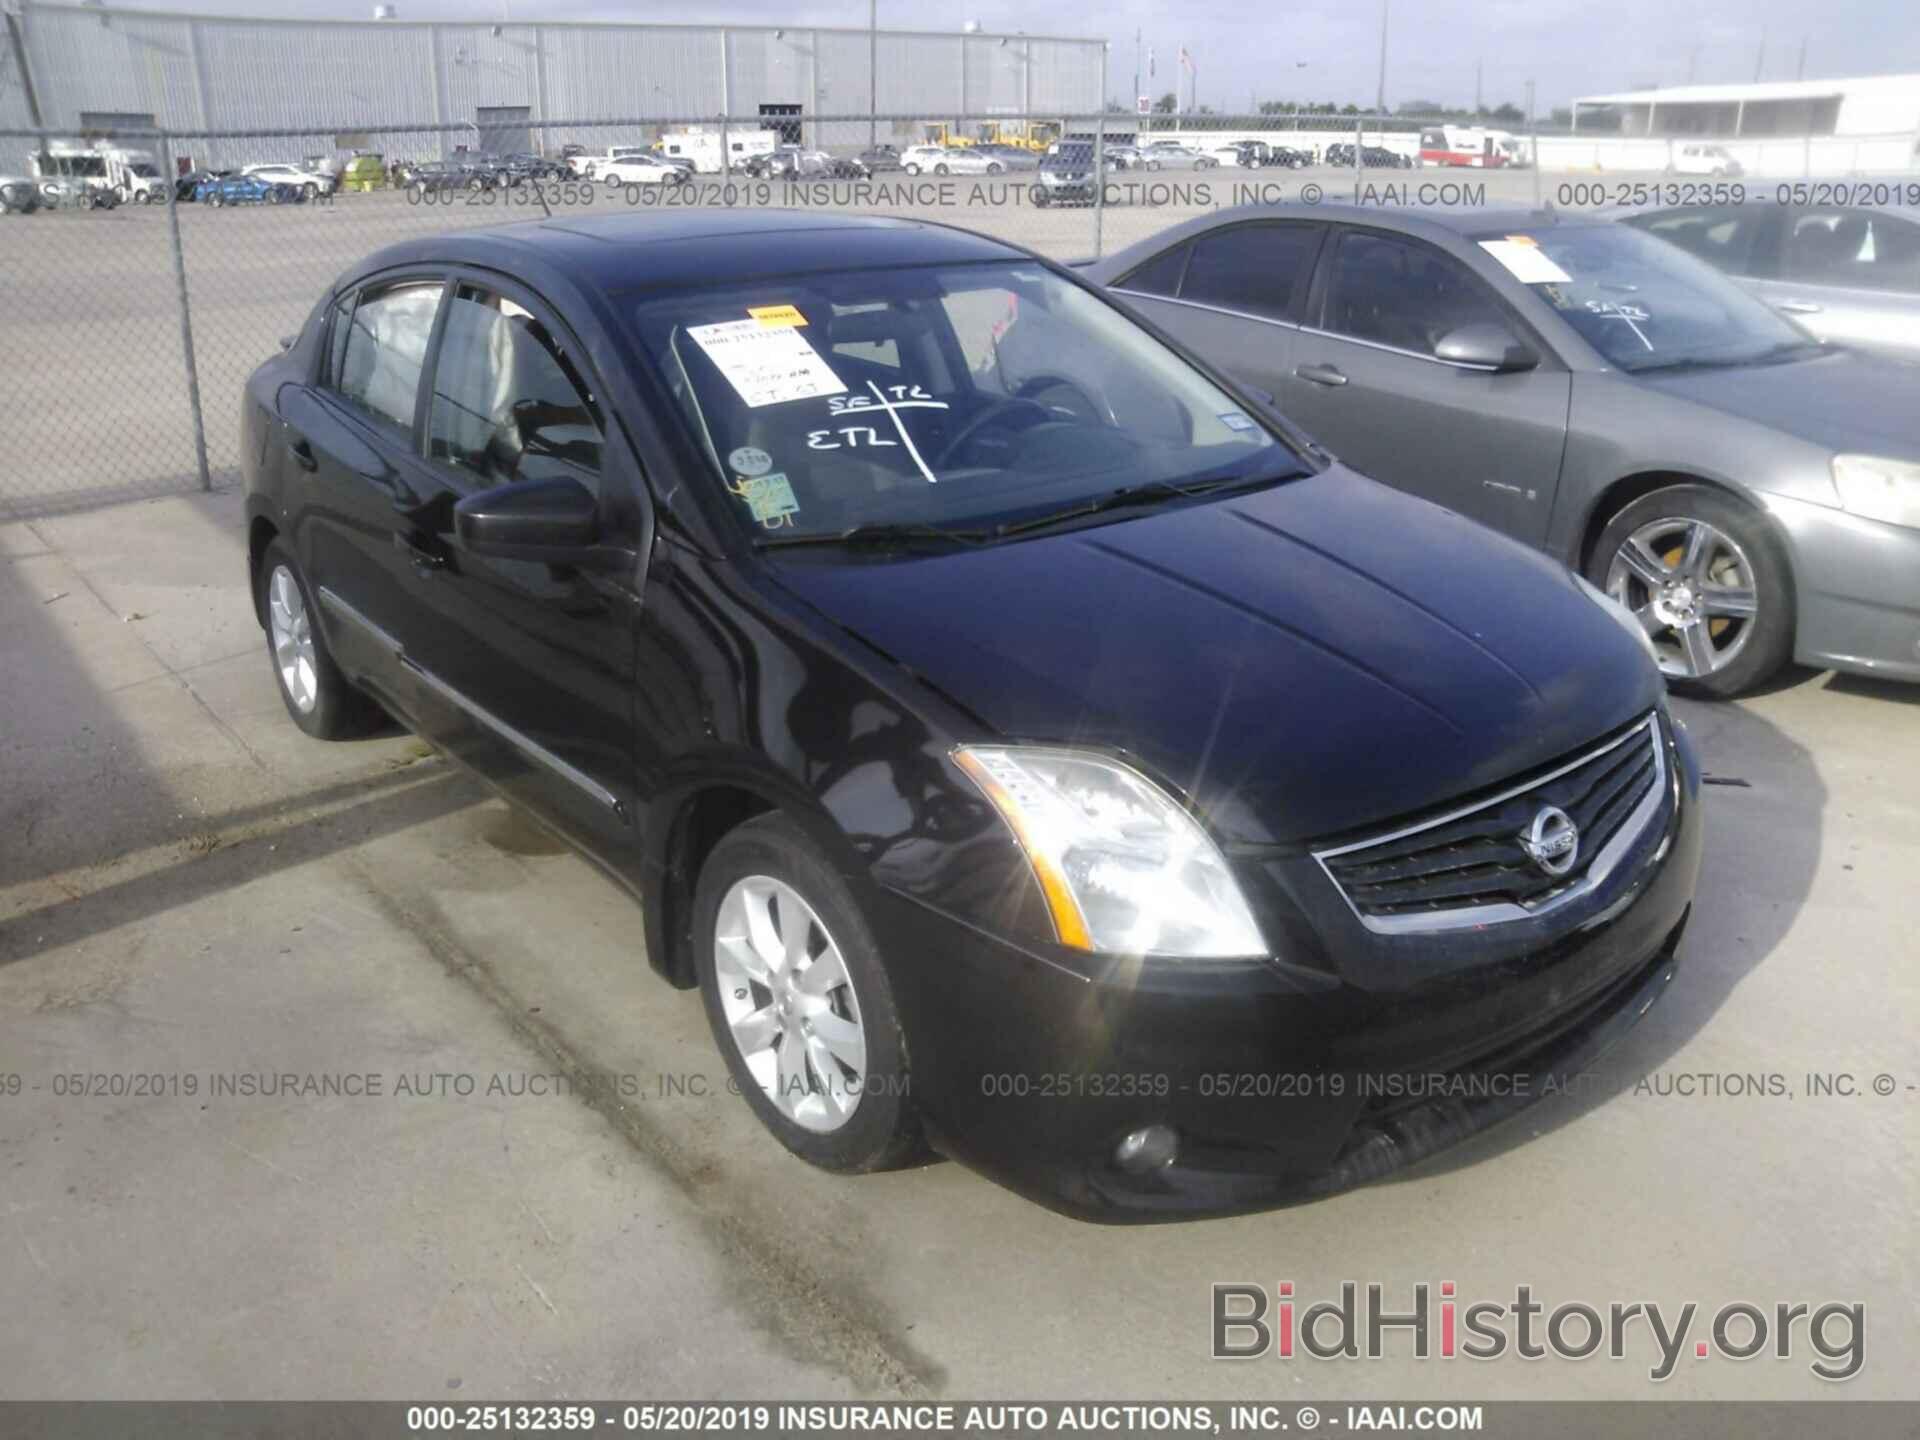 Photo 3N1AB6APXCL654351 - NISSAN SENTRA 2012